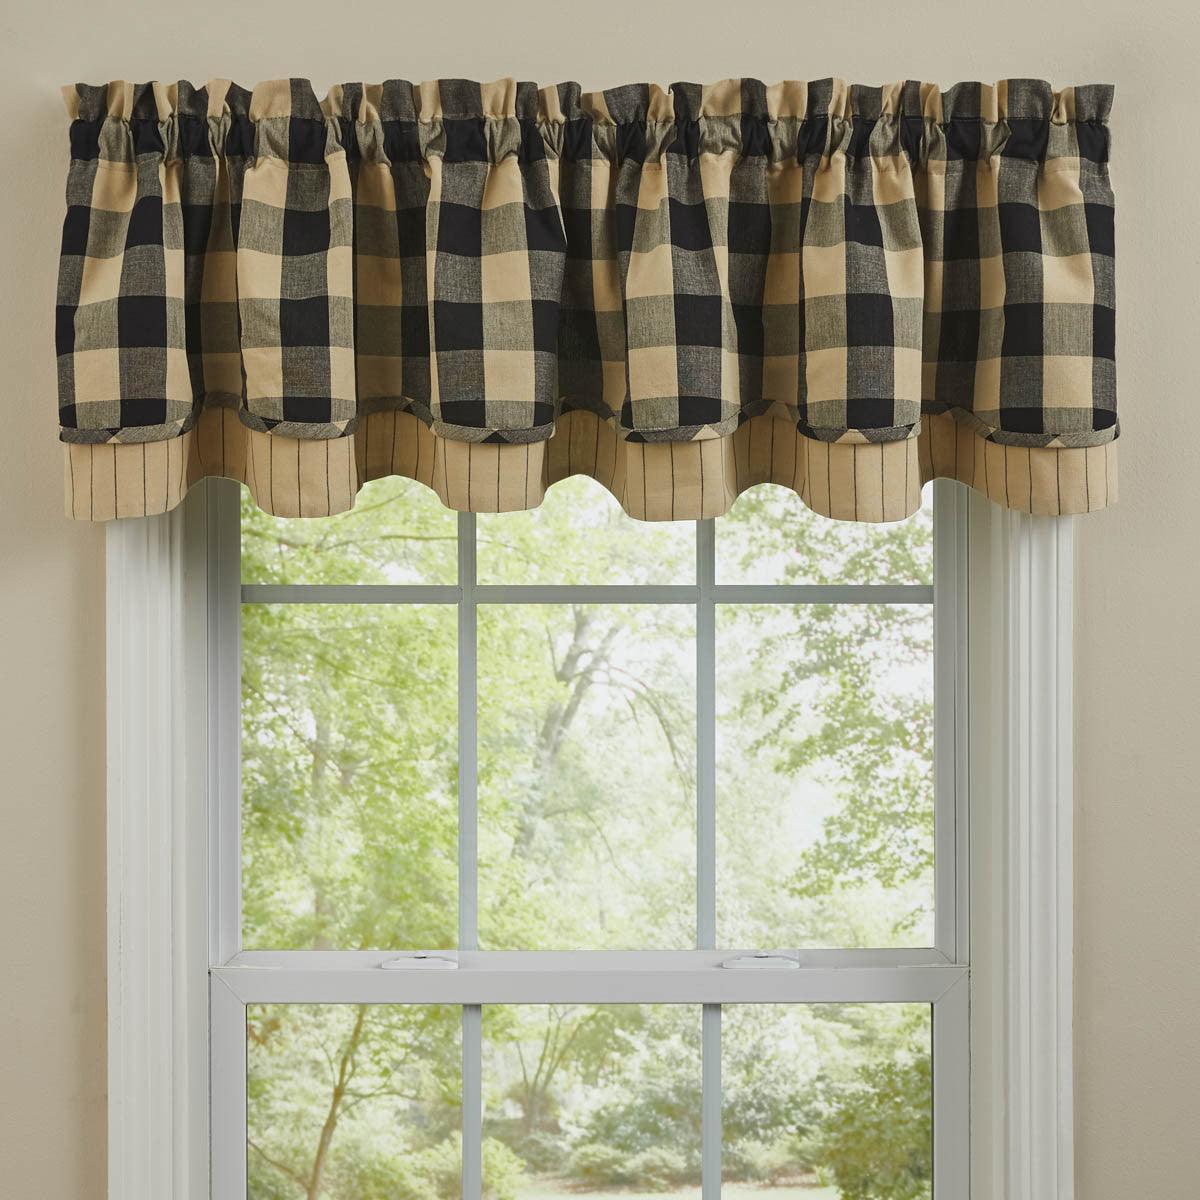 Wicklow Check Valance - Lined Layered Black Park Designs